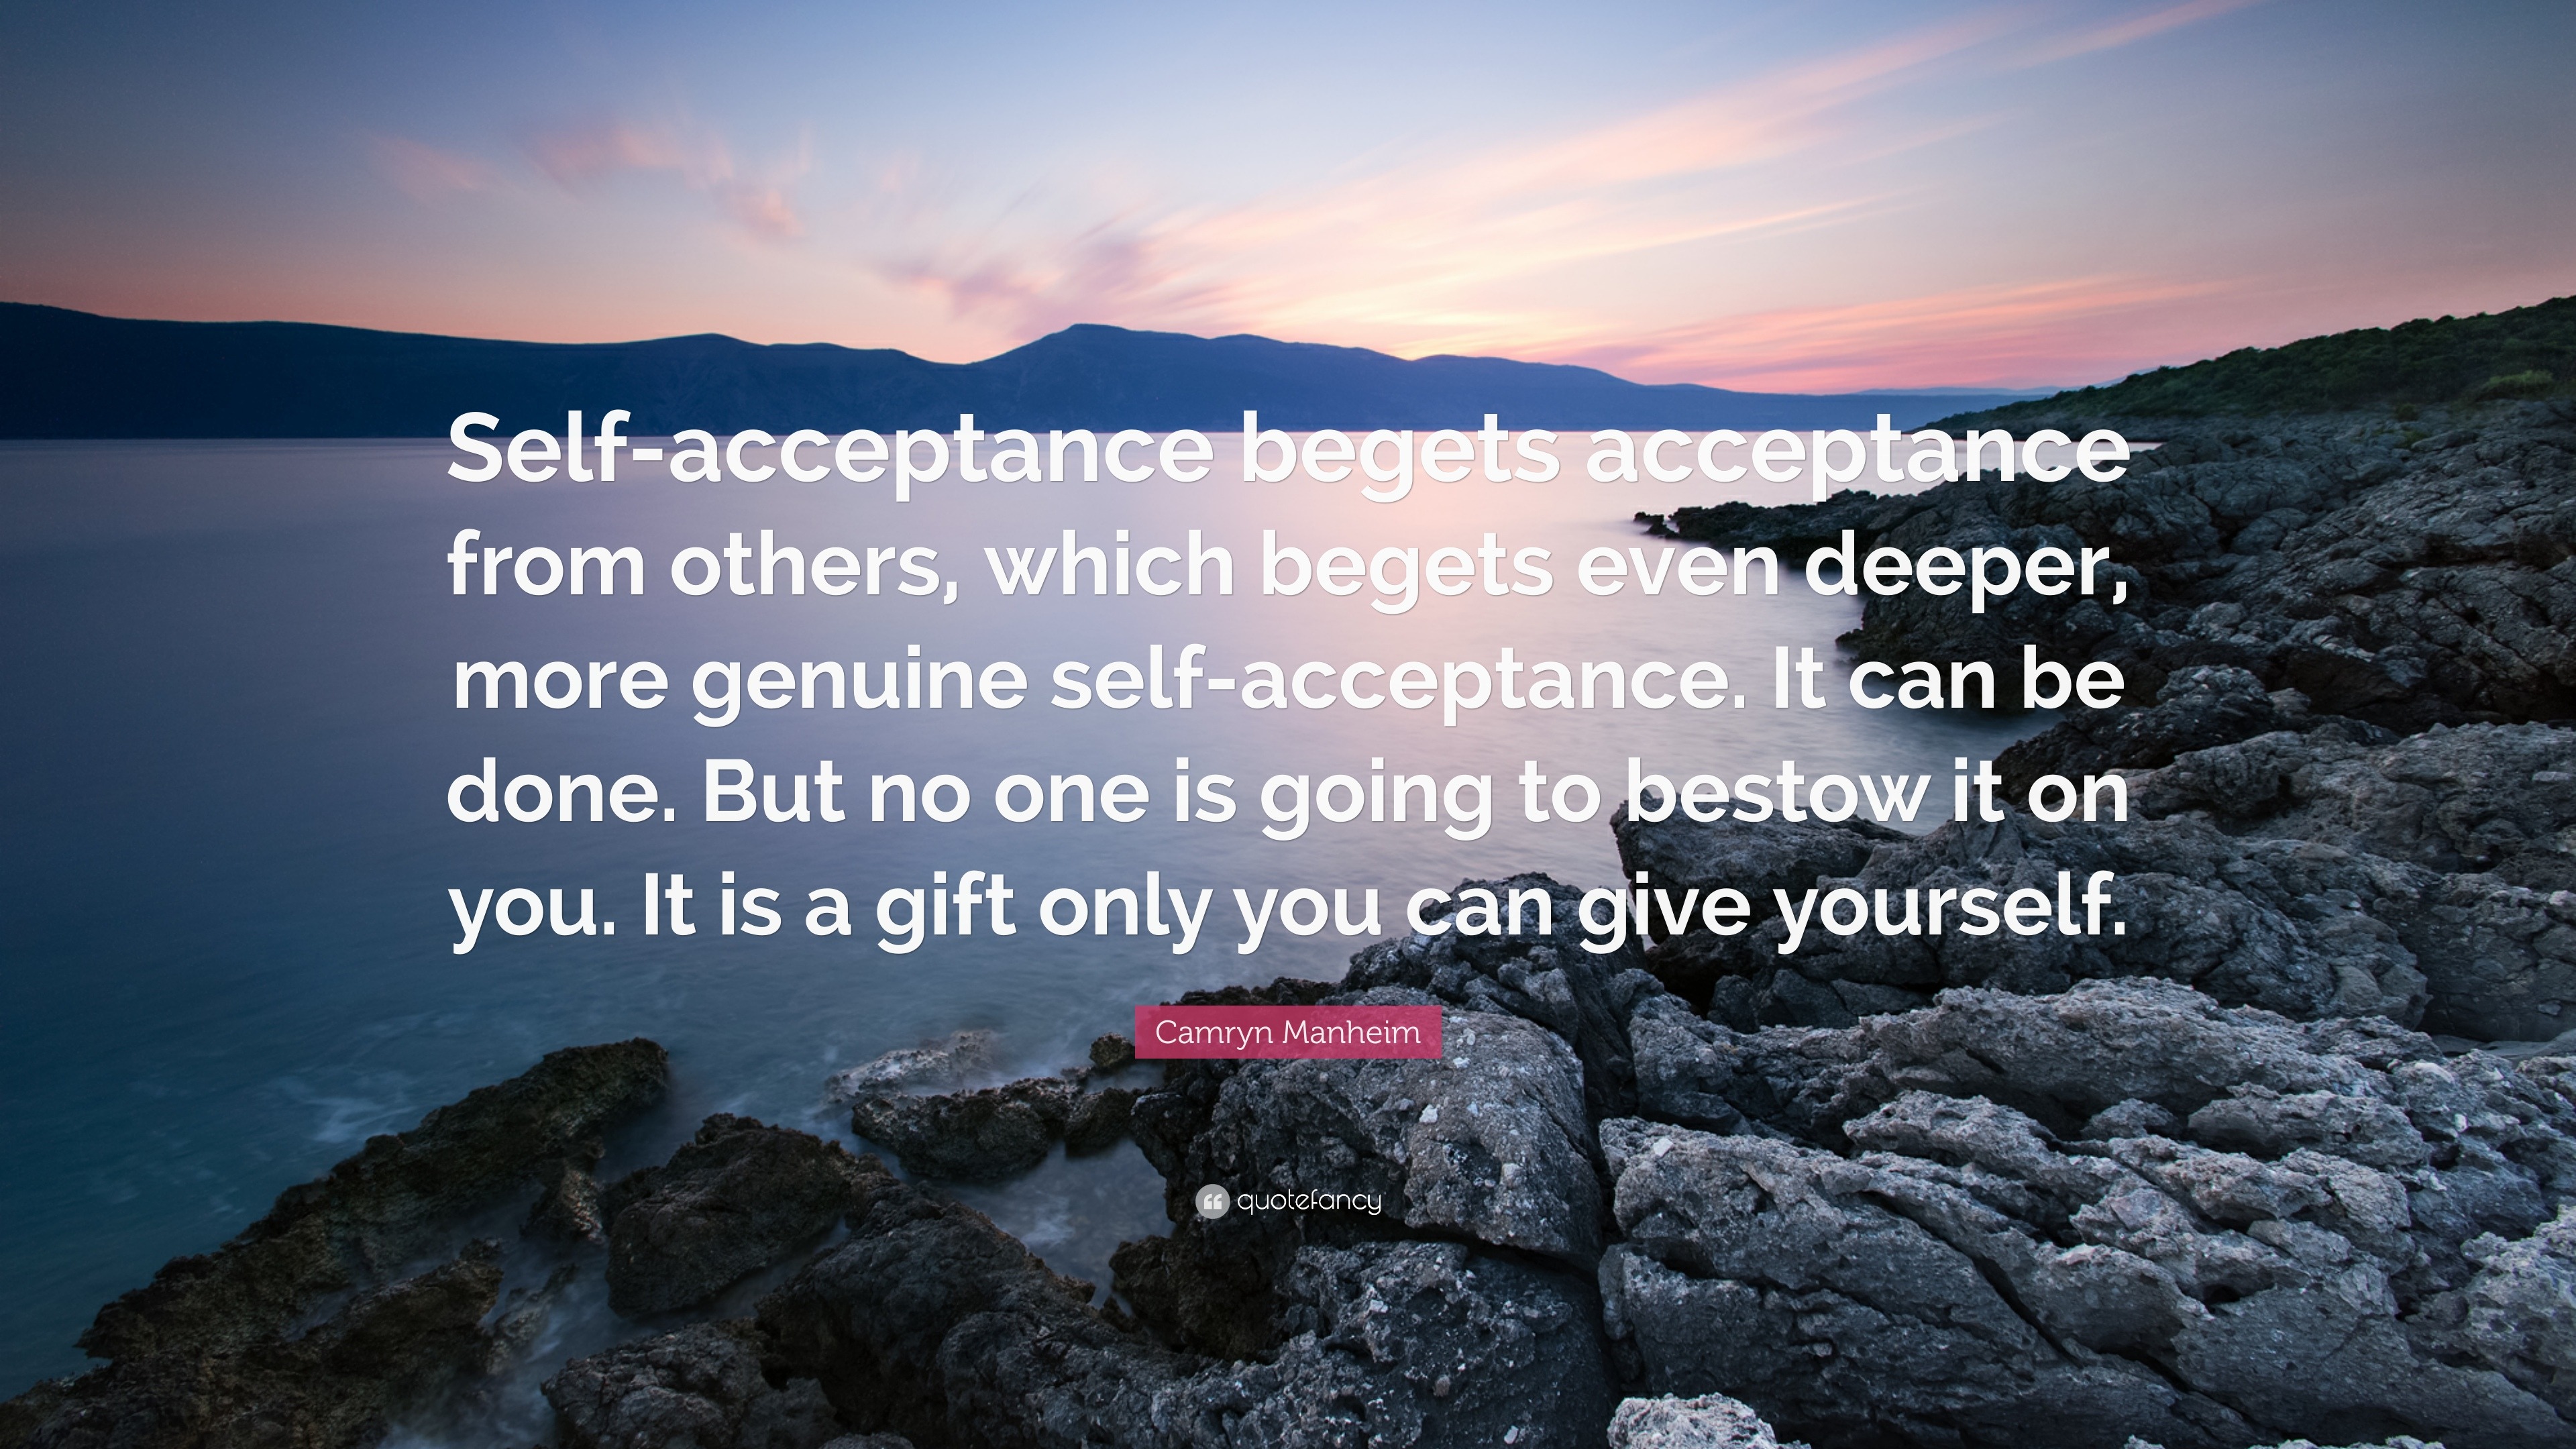 Camryn Manheim Quote: “Self-acceptance begets acceptance from others ...